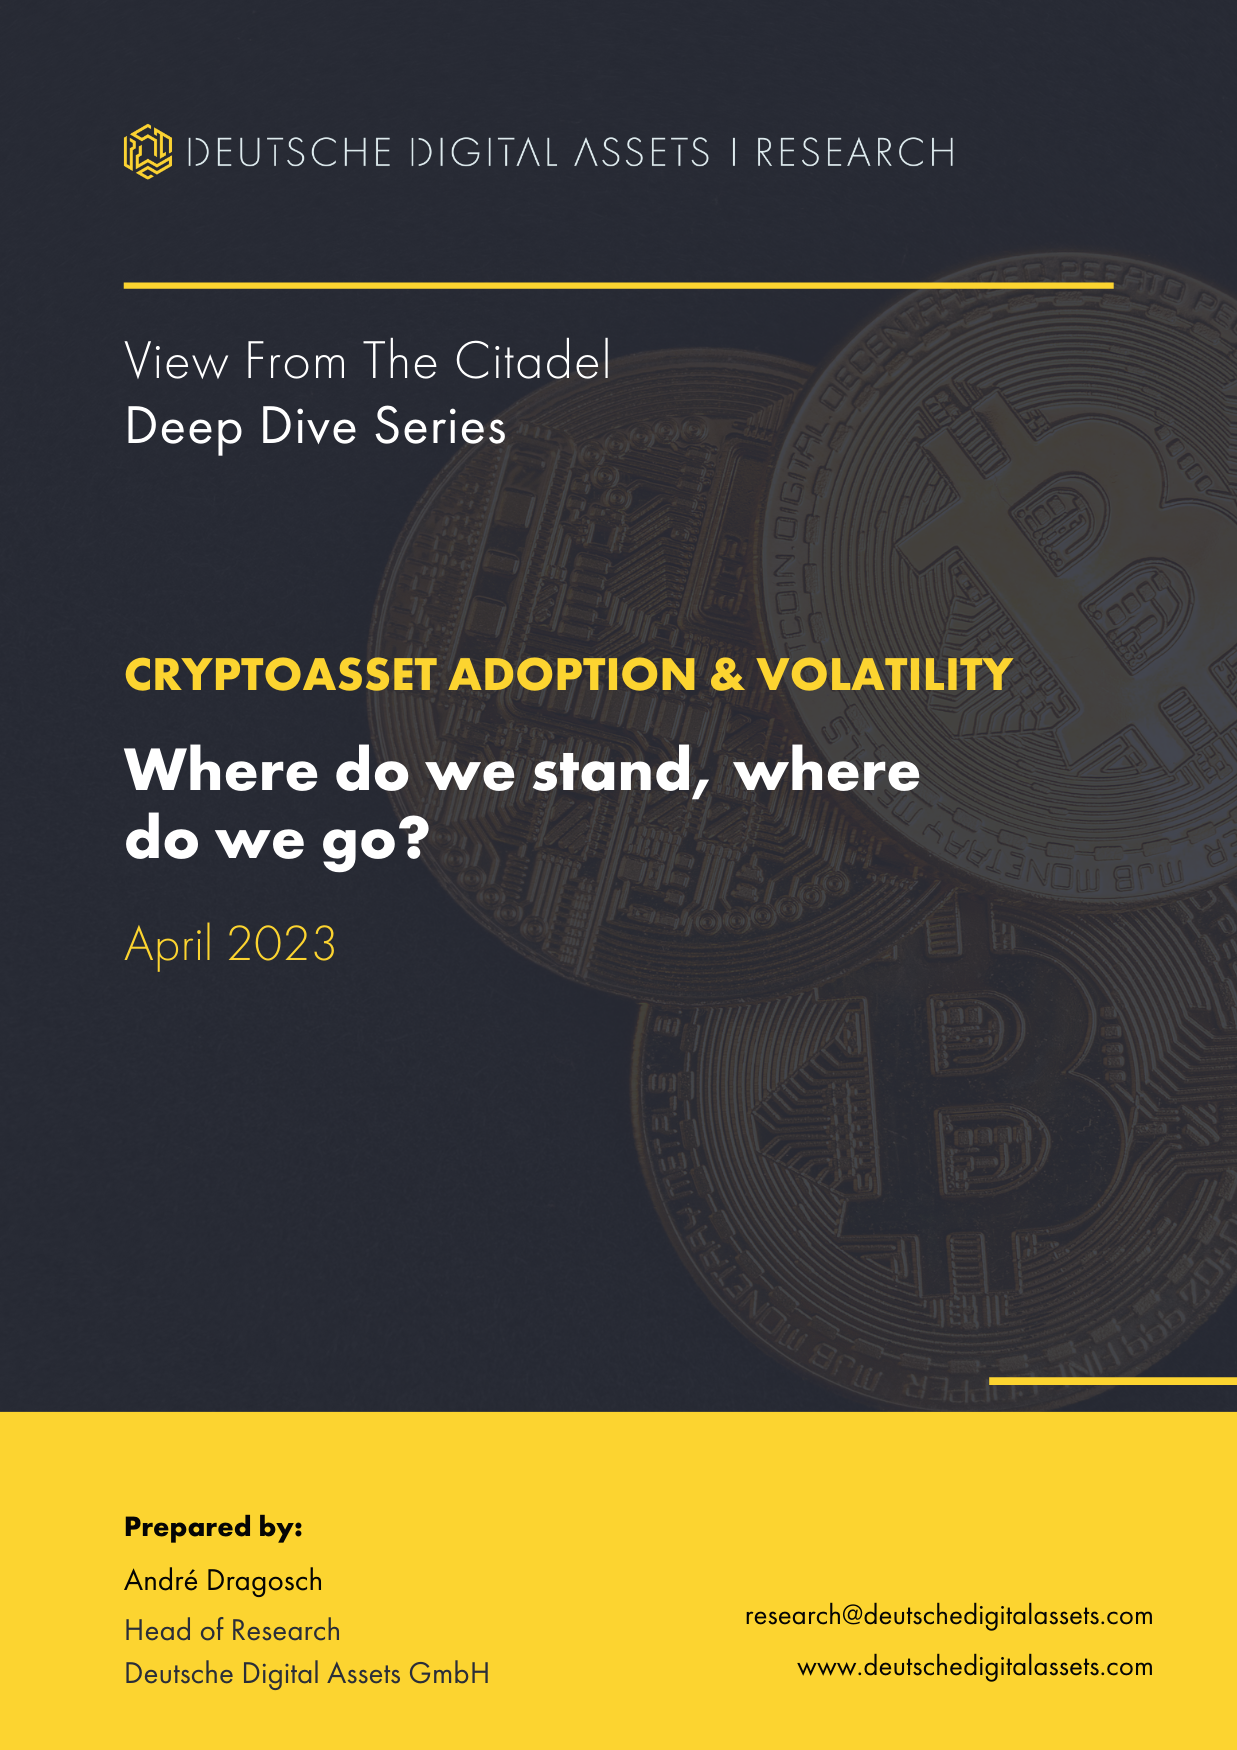 Cryptoasset Adoption and Volatility, DDA research reports, Crypto research reports, View from the Citadel report   